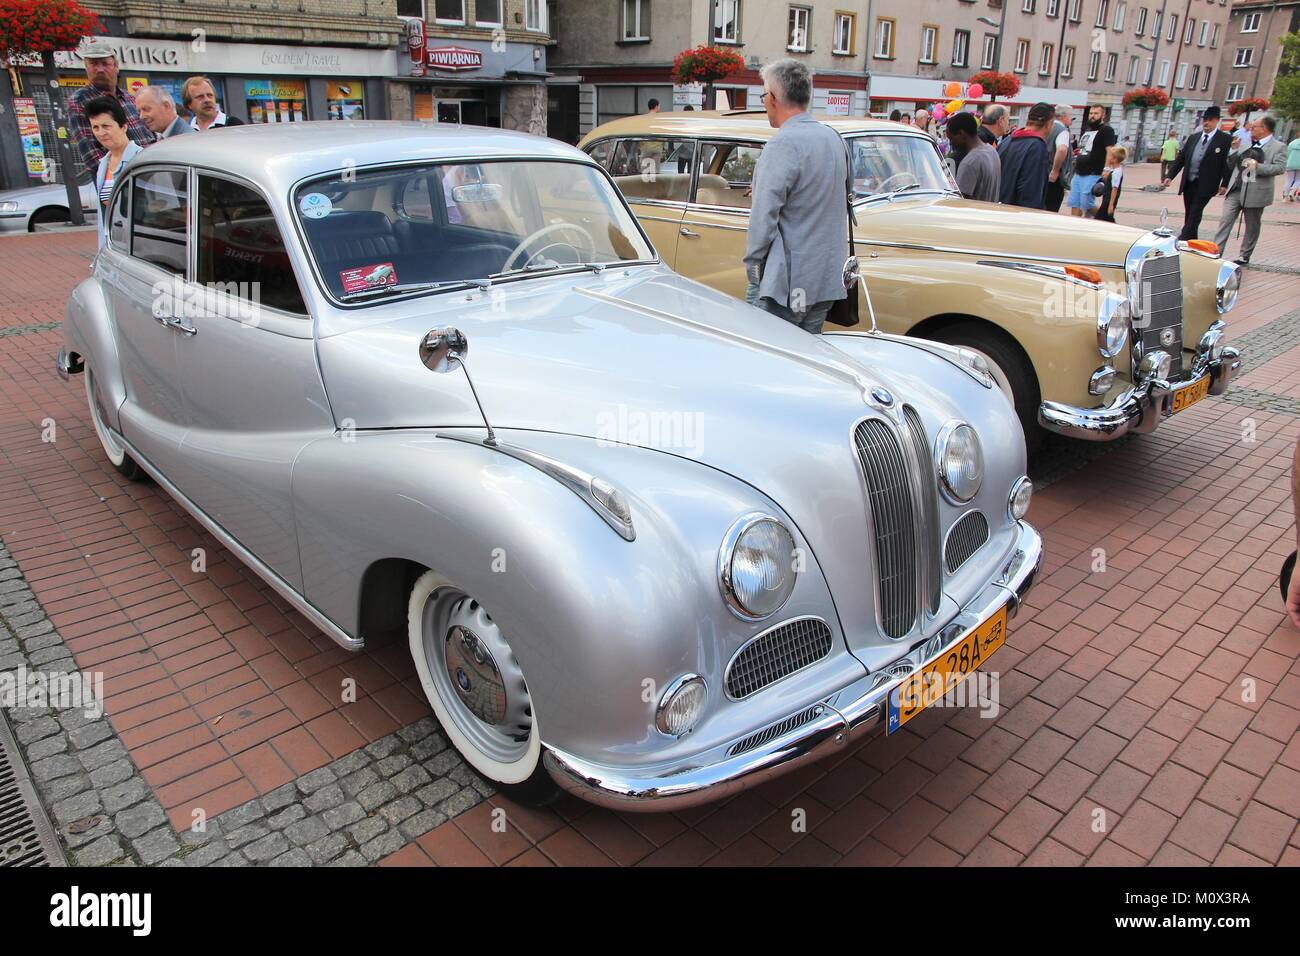 BYTOM, POLAND - SEPTEMBER 12, 2015: People walk by BMW 501 and Mercedes-Benz 300 oldtimer cars during 12th Historic Vehicle Rally in Bytom. Stock Photo